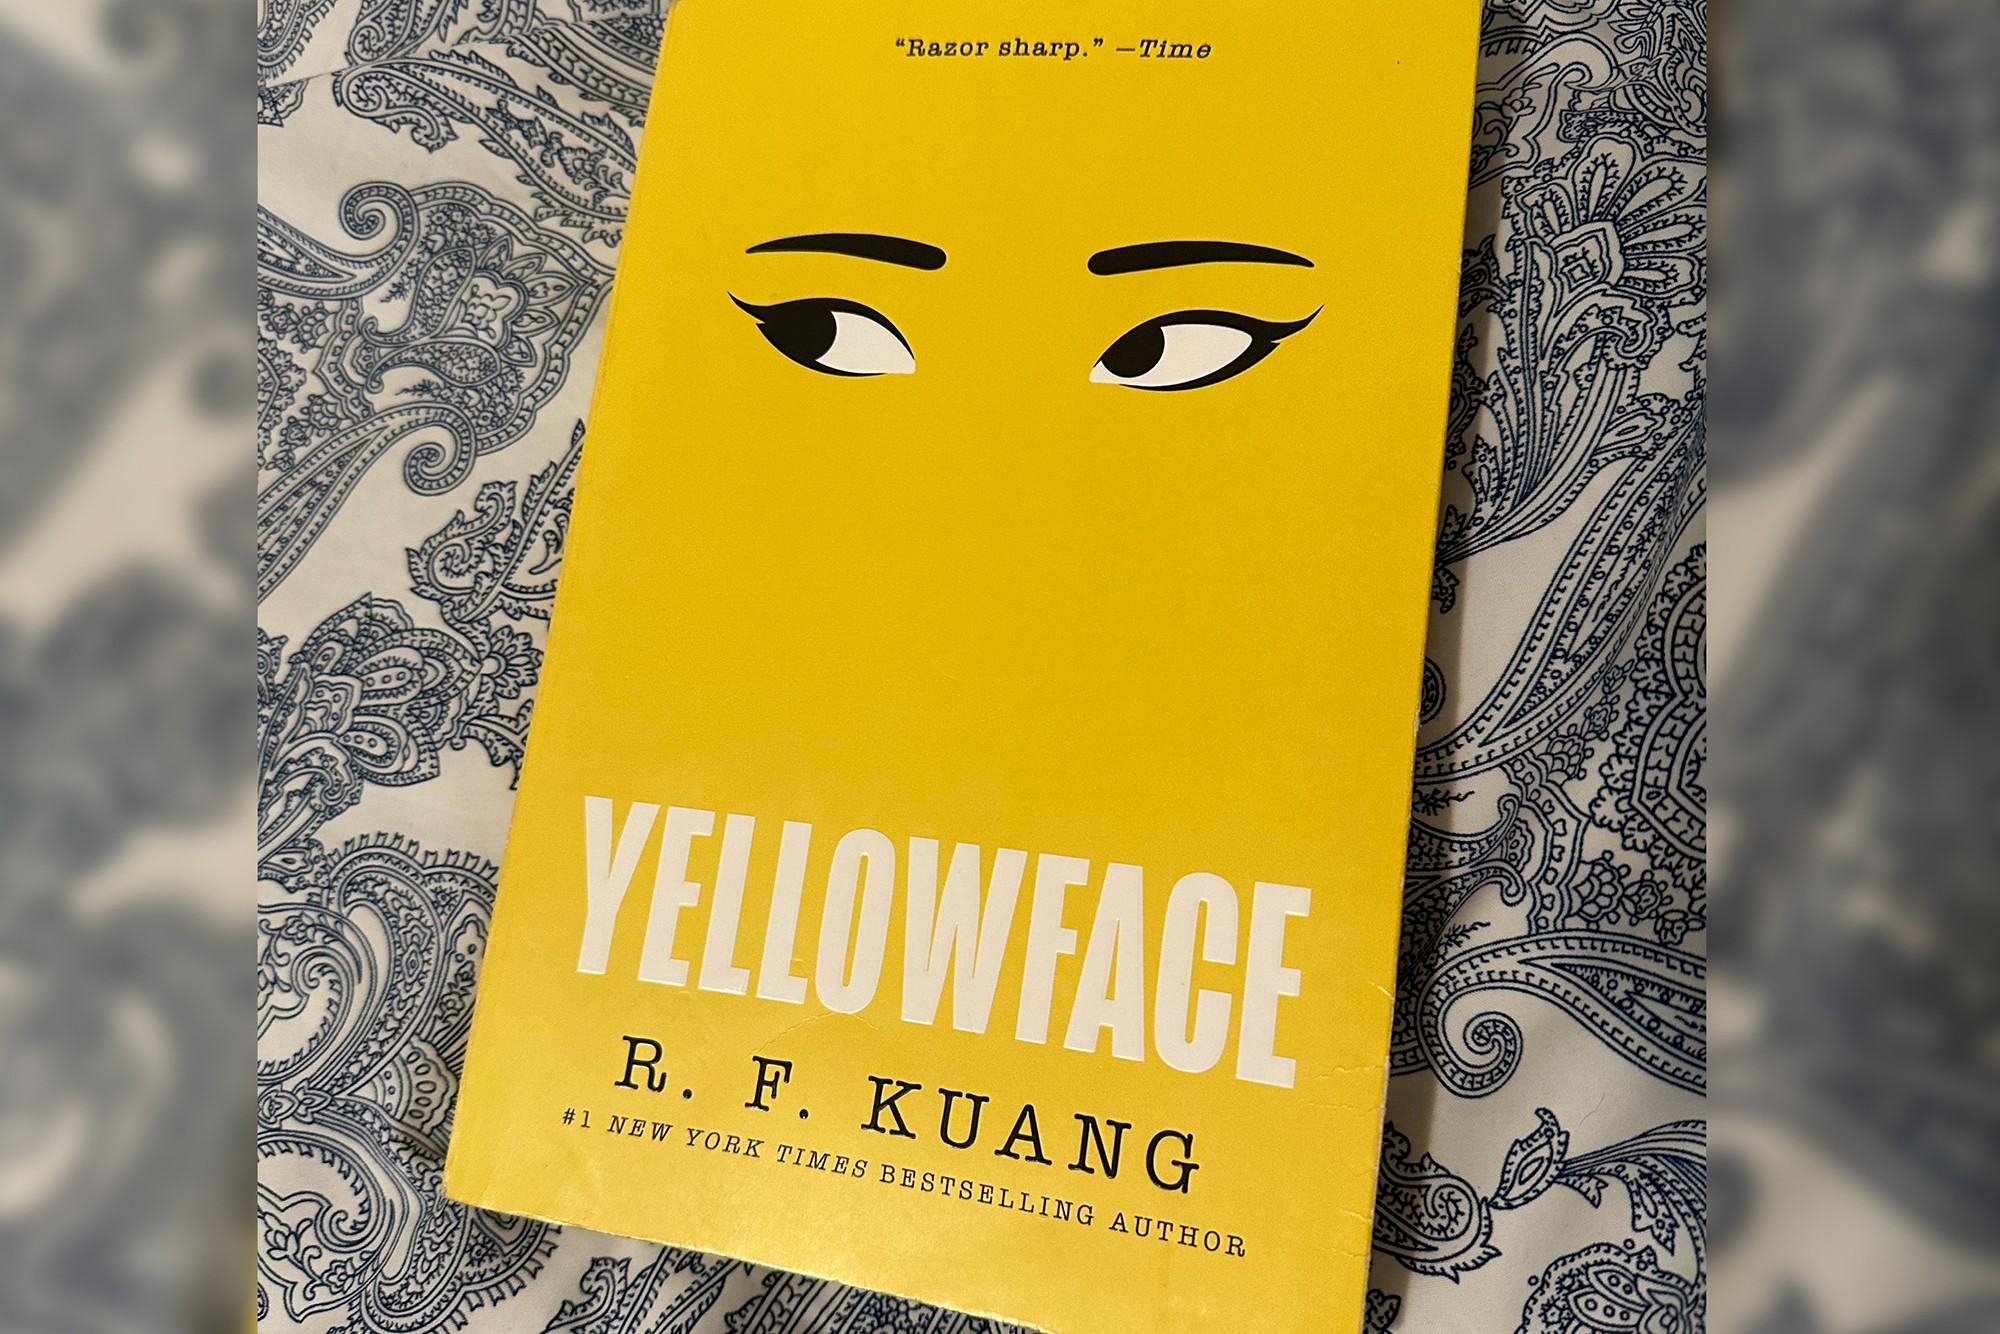 A copy of Yellowface by R. F. Kuang on a patterned cloth